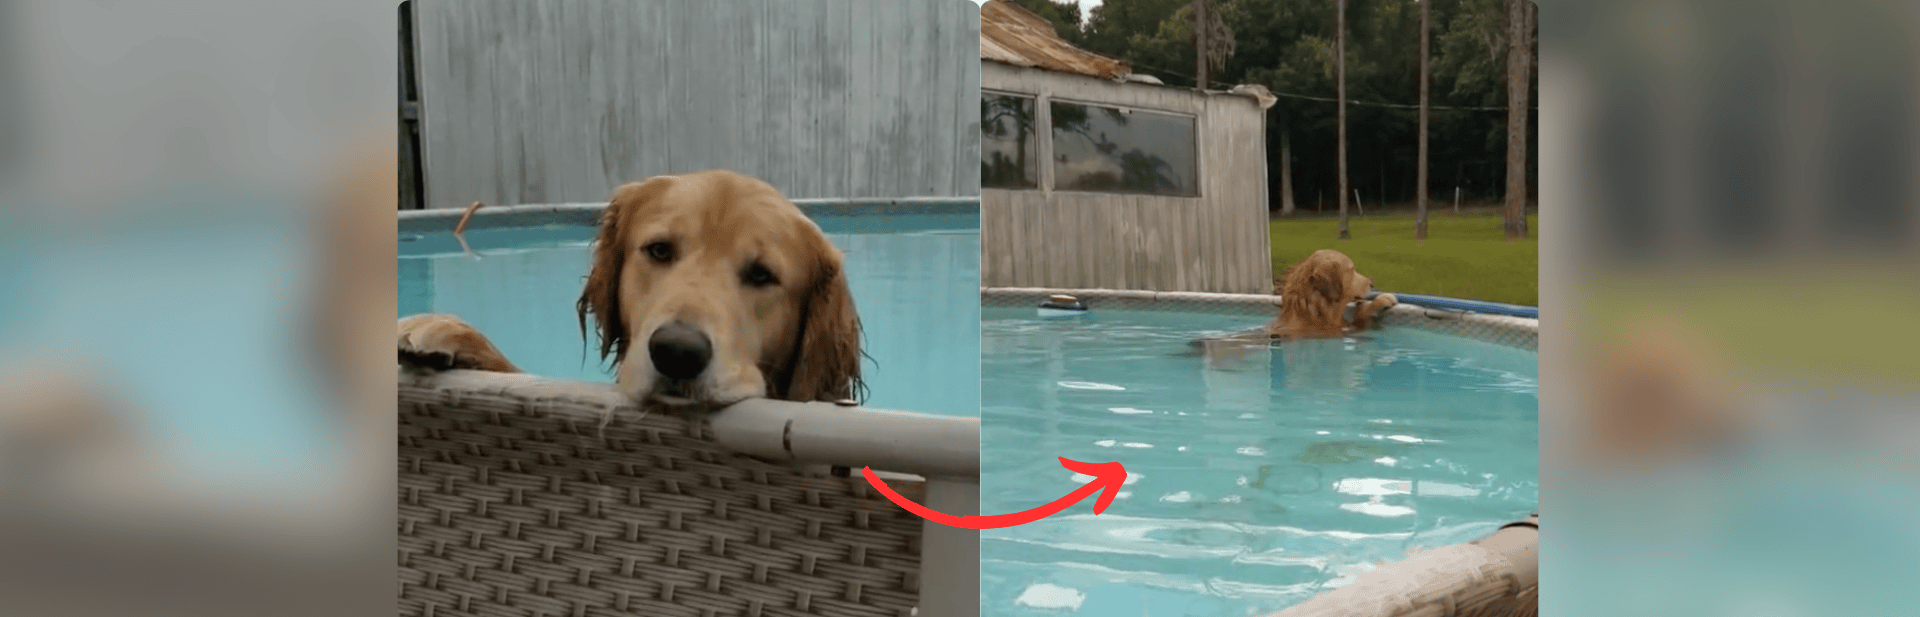 Rebellious Golden Retriever Adorably Refuses to Leave Pool, Has a Unique Way of Telling His Owner